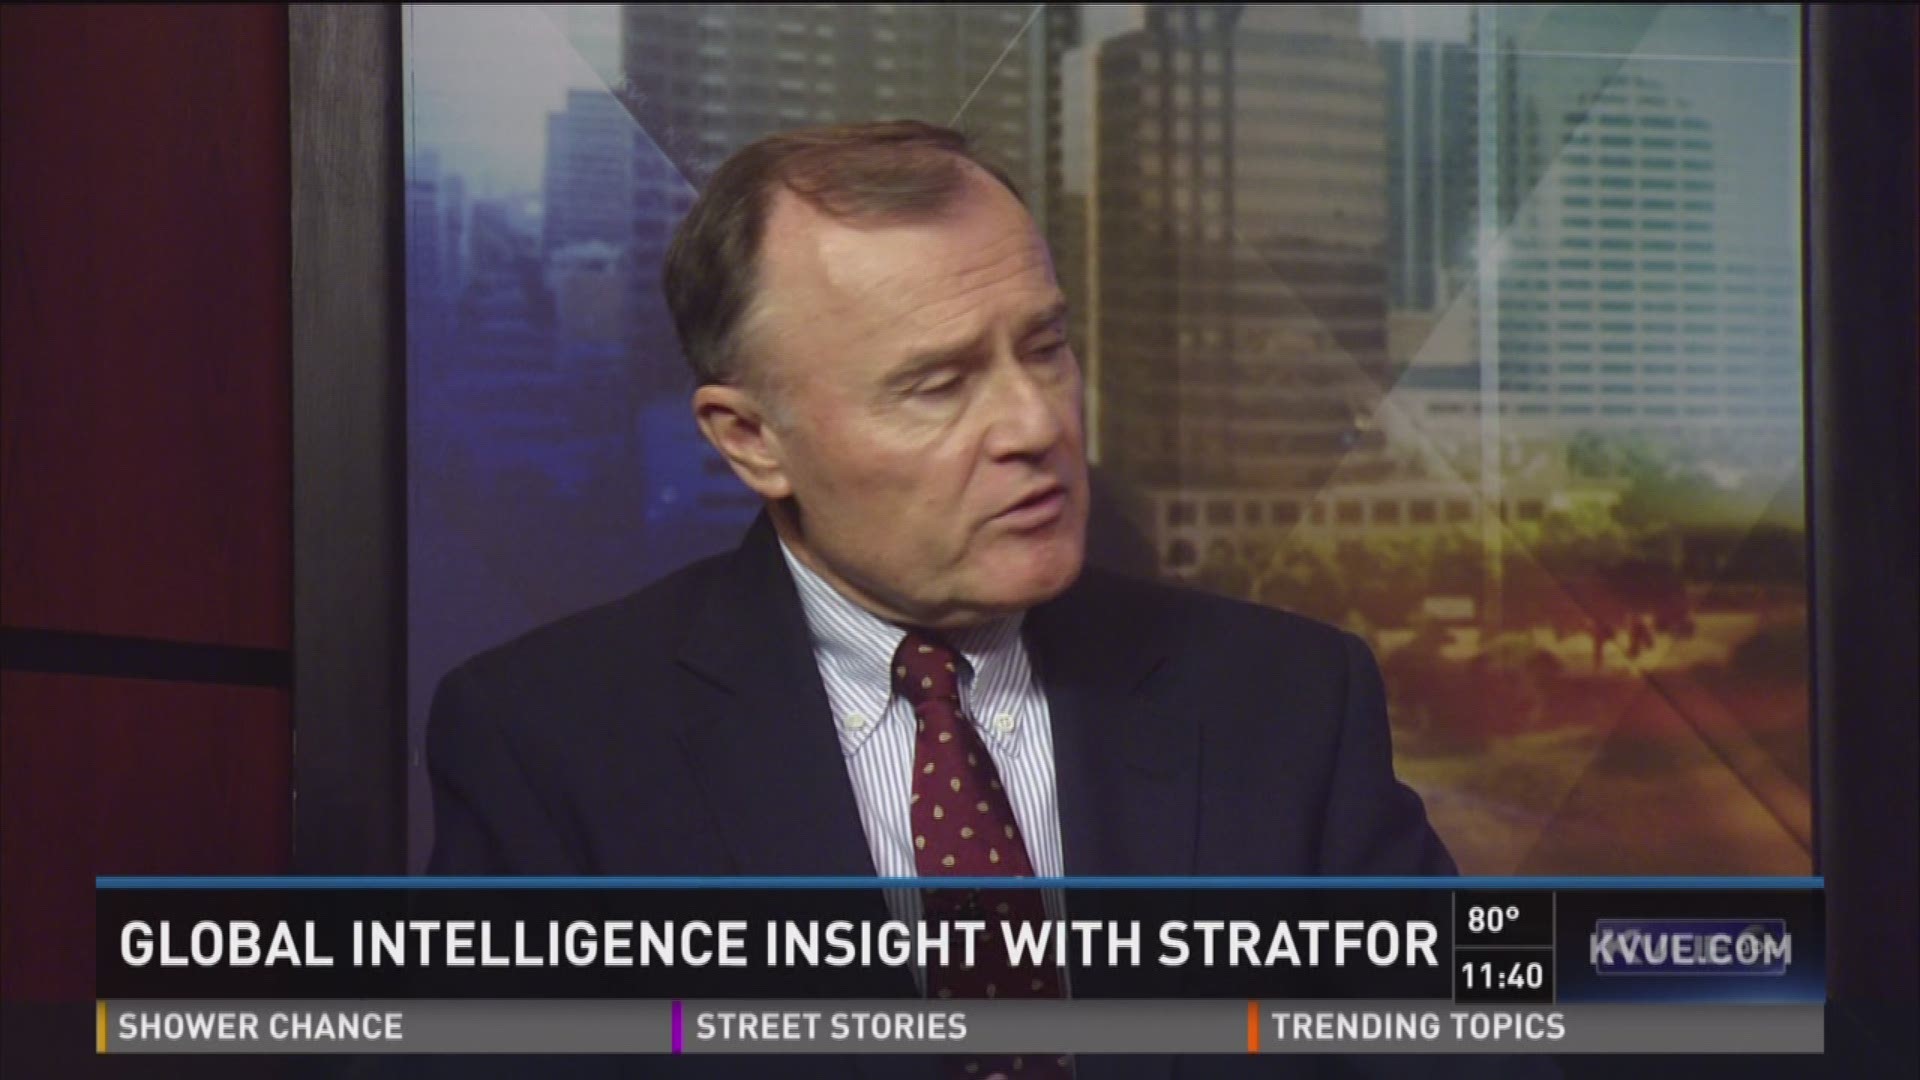 Global intelligence insight with Stratfor